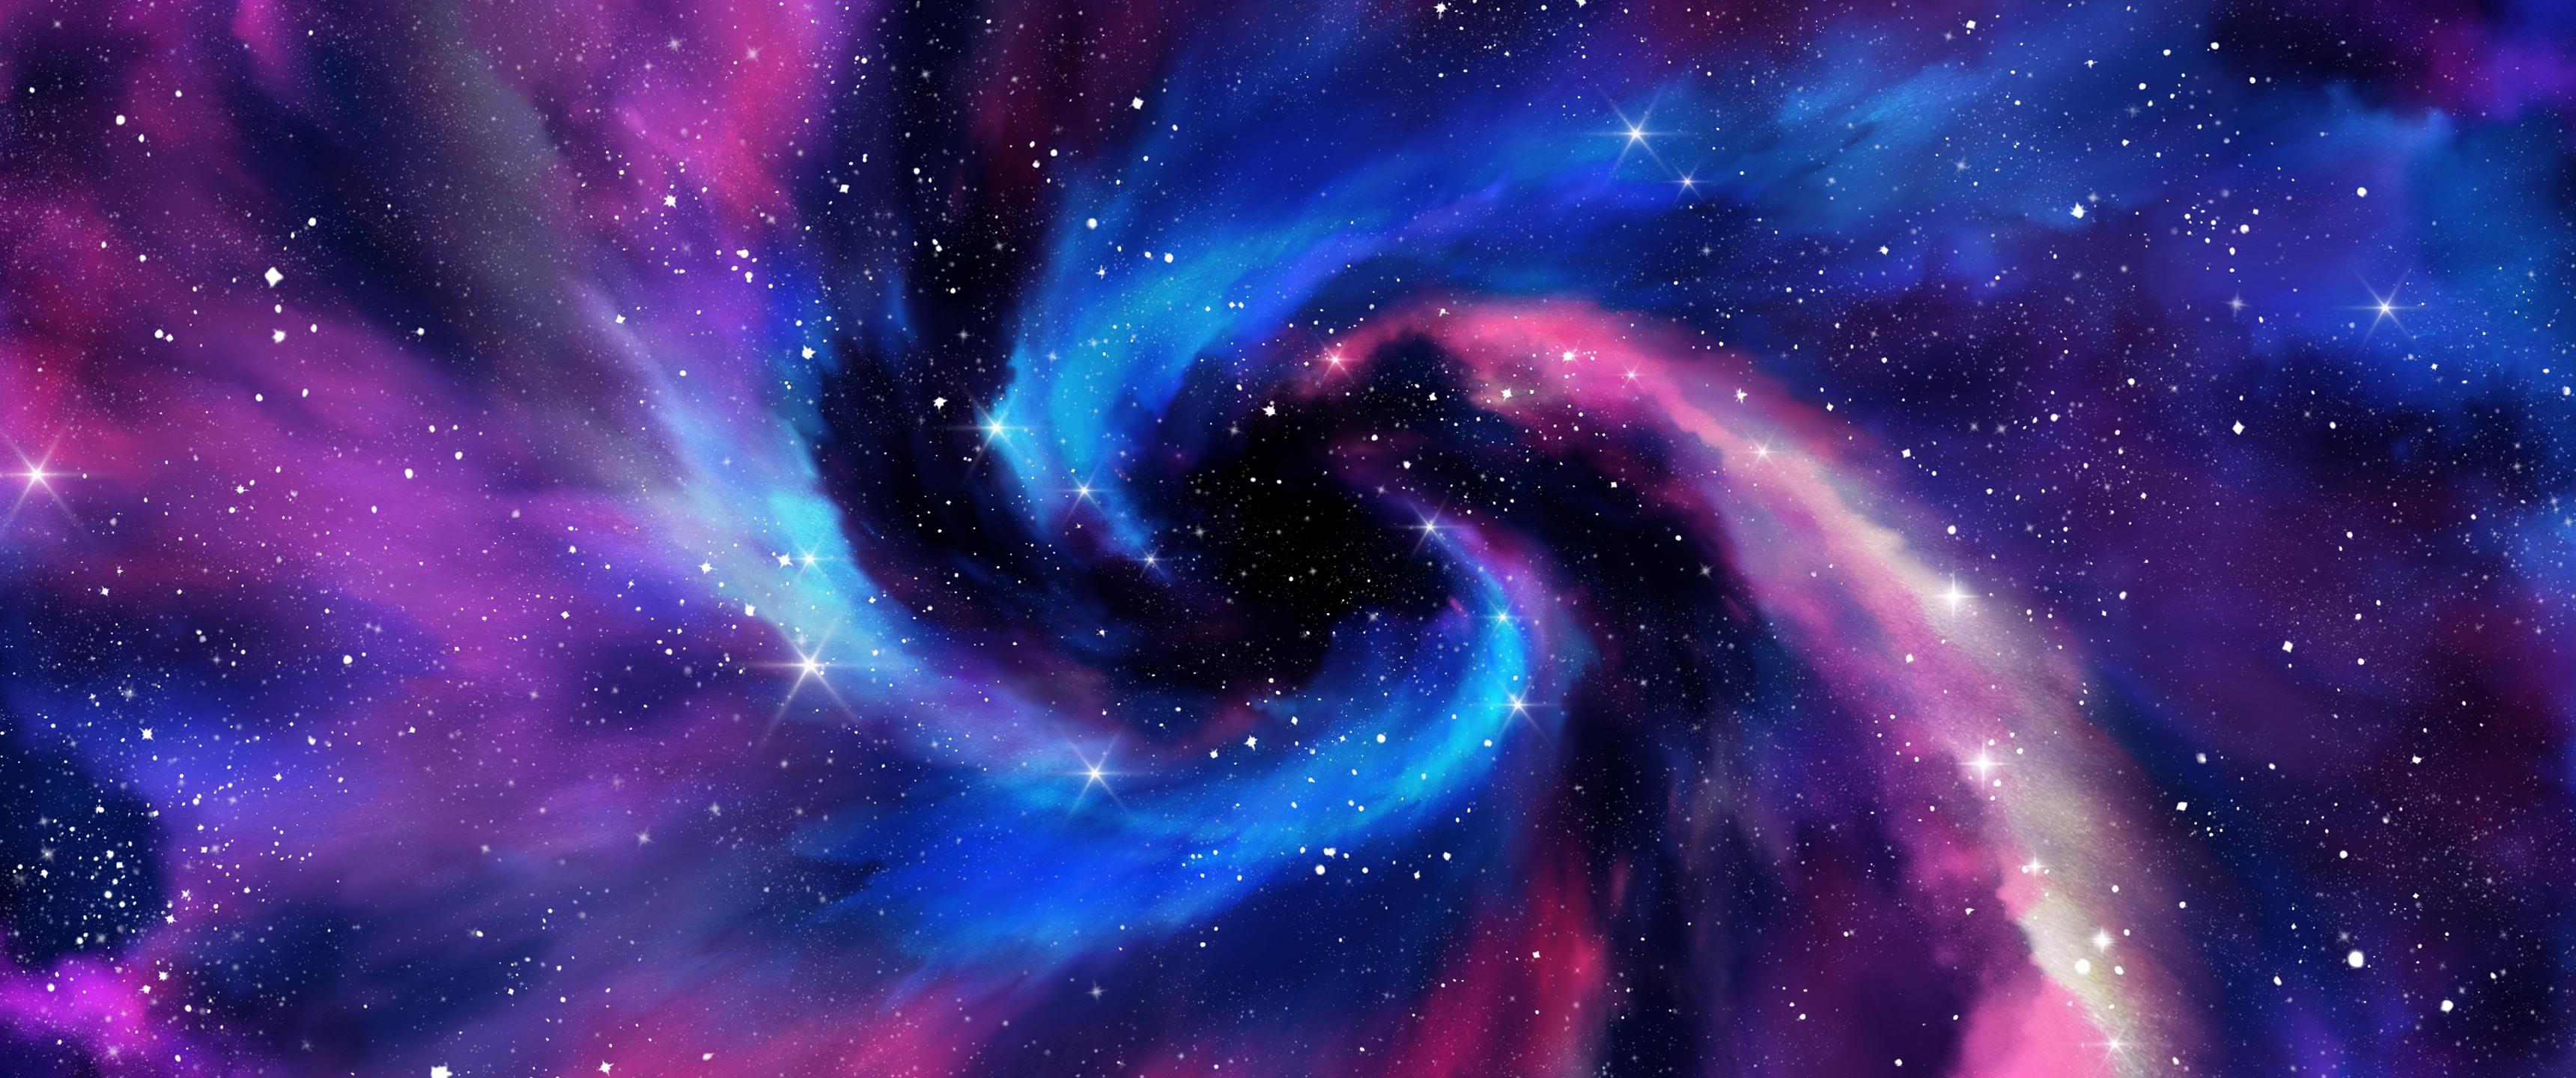 Nebula In Outer Space, Colorful Space Wallpaper Art Print | lupon.gov.ph